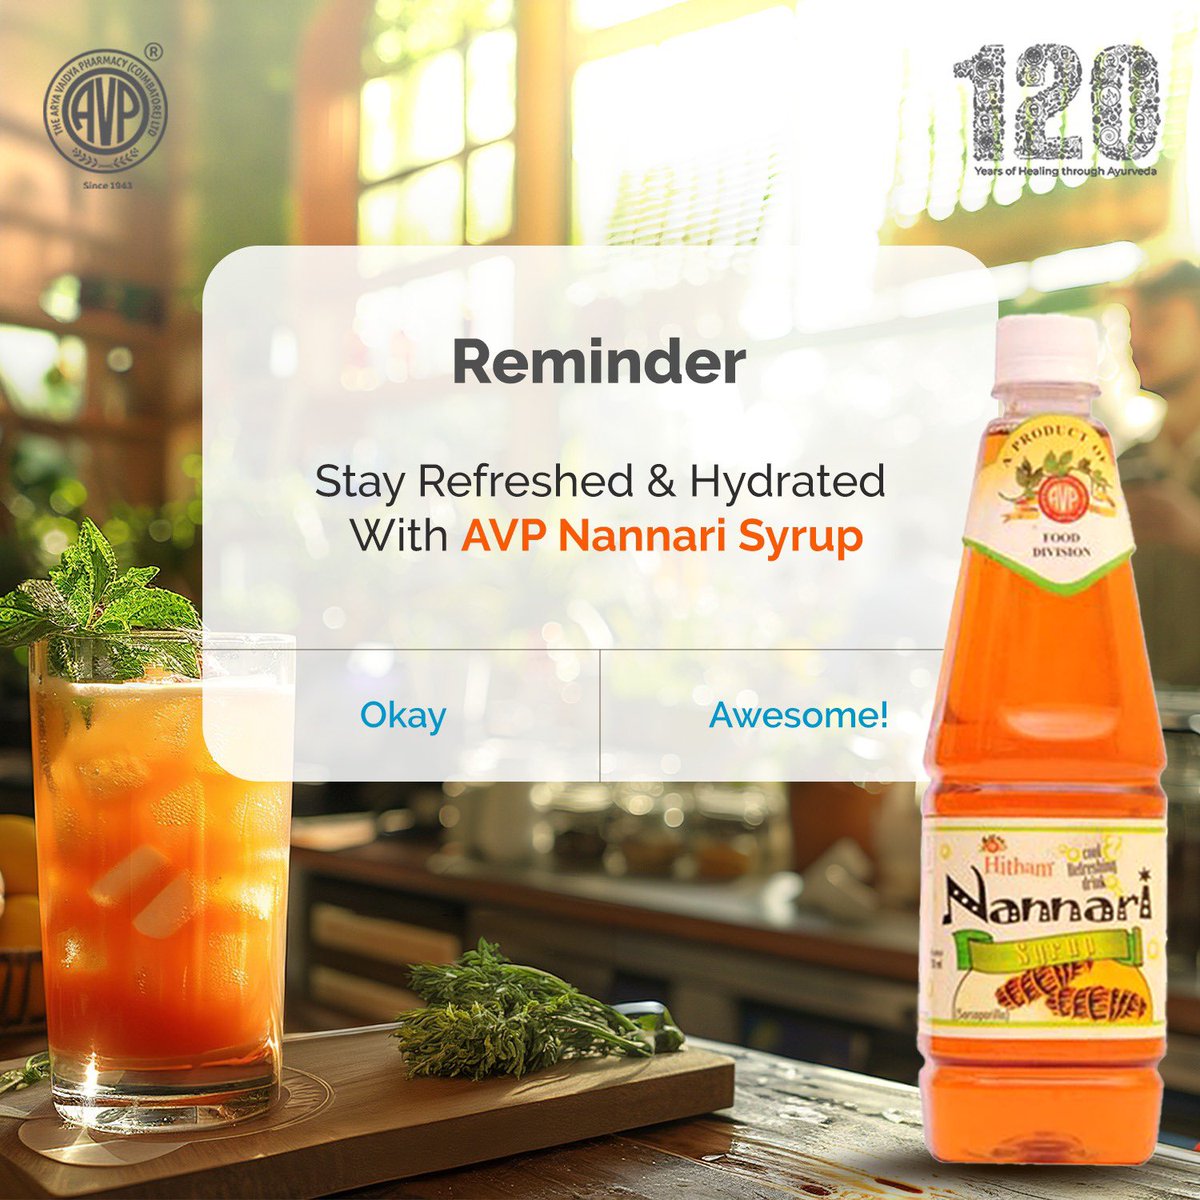 Stay cool and rejuvenated with AVP's Nannari Syrup. Combining the earthy flavour of Indian Sarsaparilla with aromatic spices, this drink offers cooling, anti-inflammatory, and blood purifying properties. Perfect for those hot days when you need a refreshing boost!
#wellness #avp